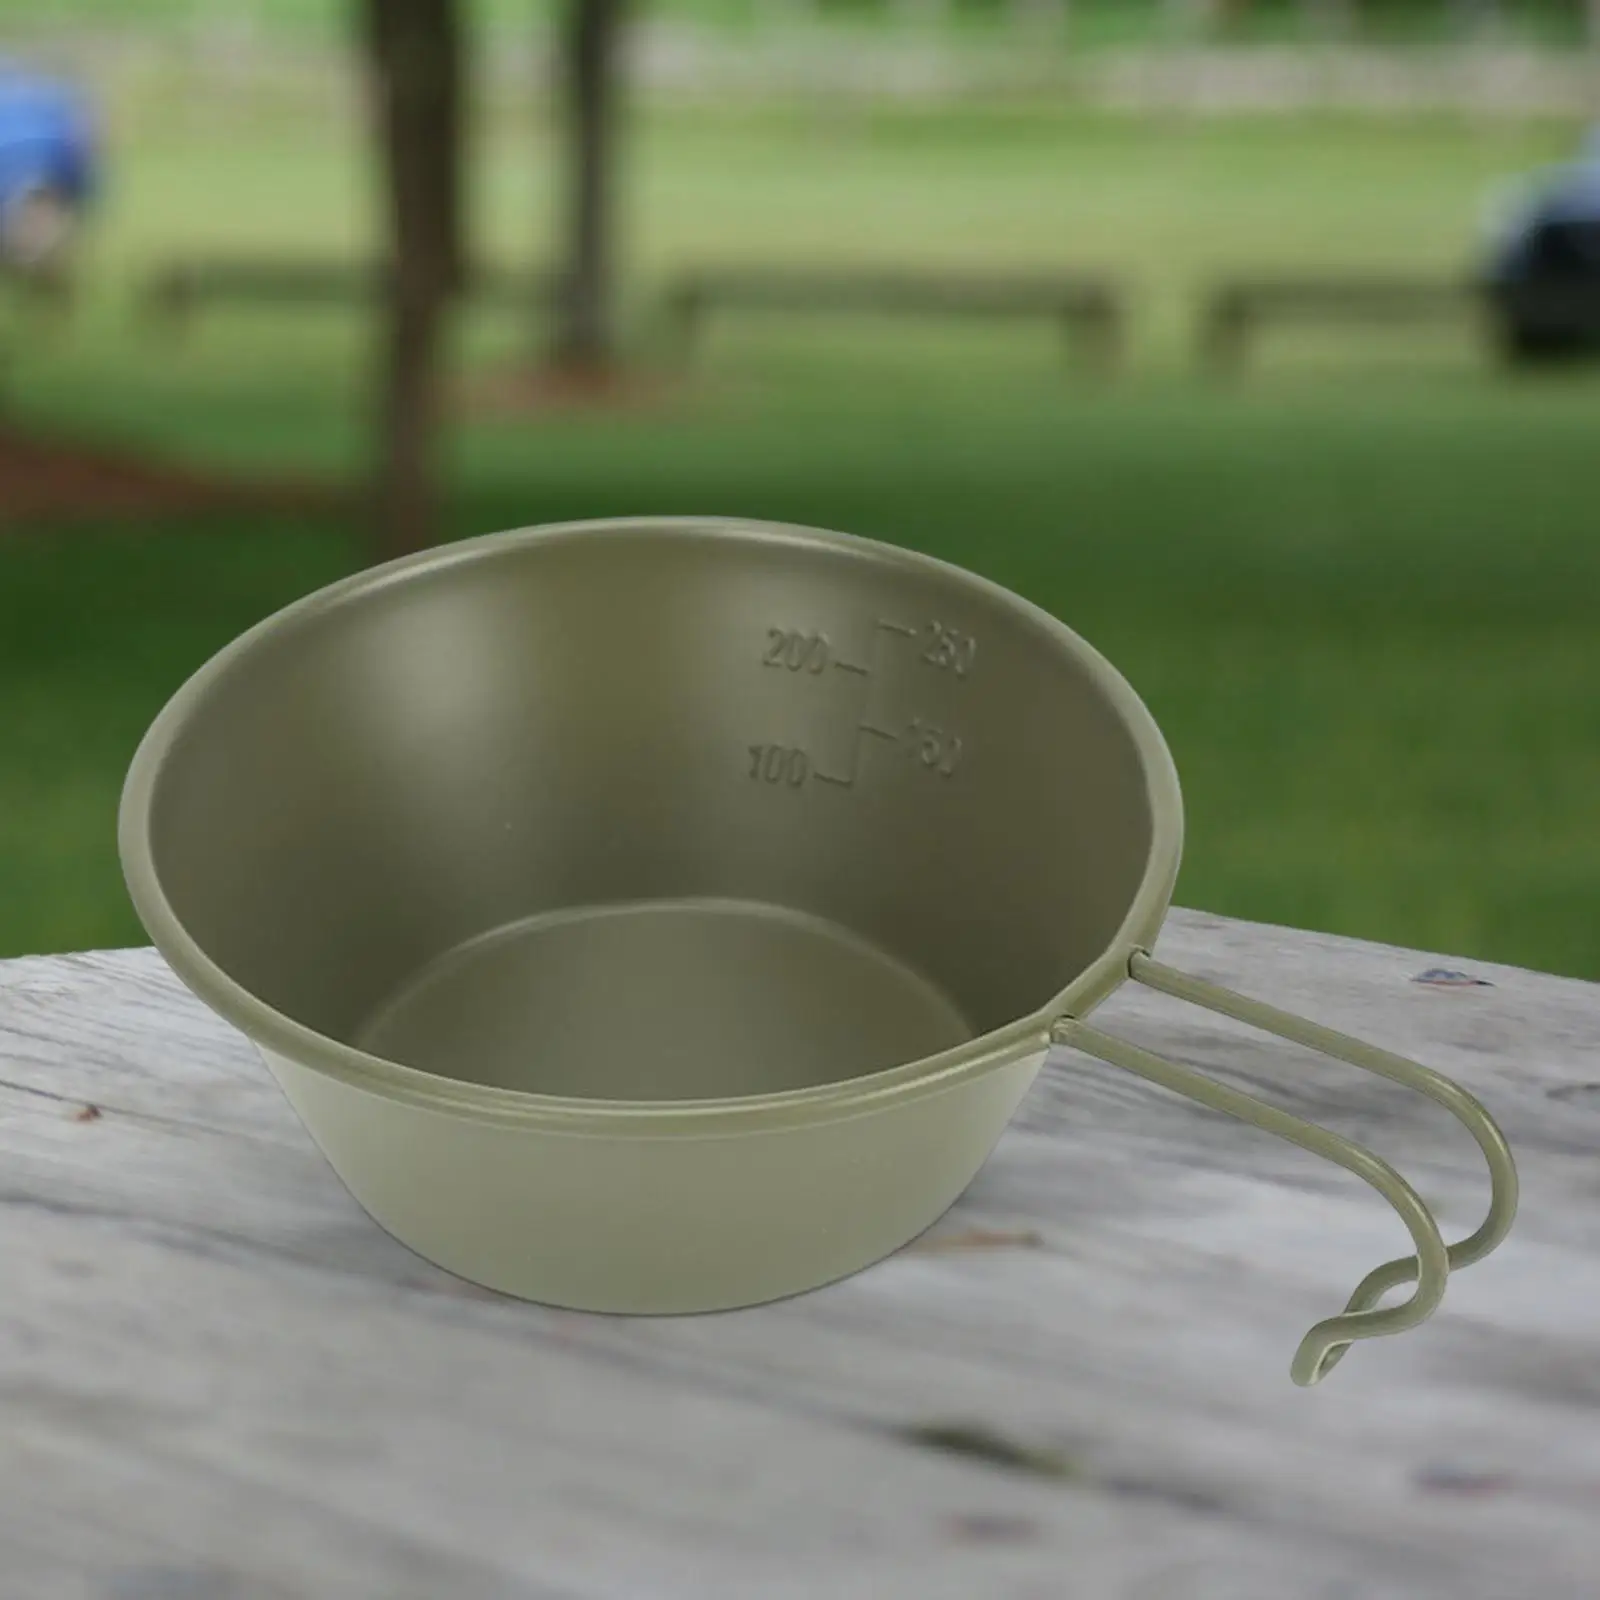 Stainless Steel Camping Bowl Outdoor Cookware Utensil Cooking Lightweight